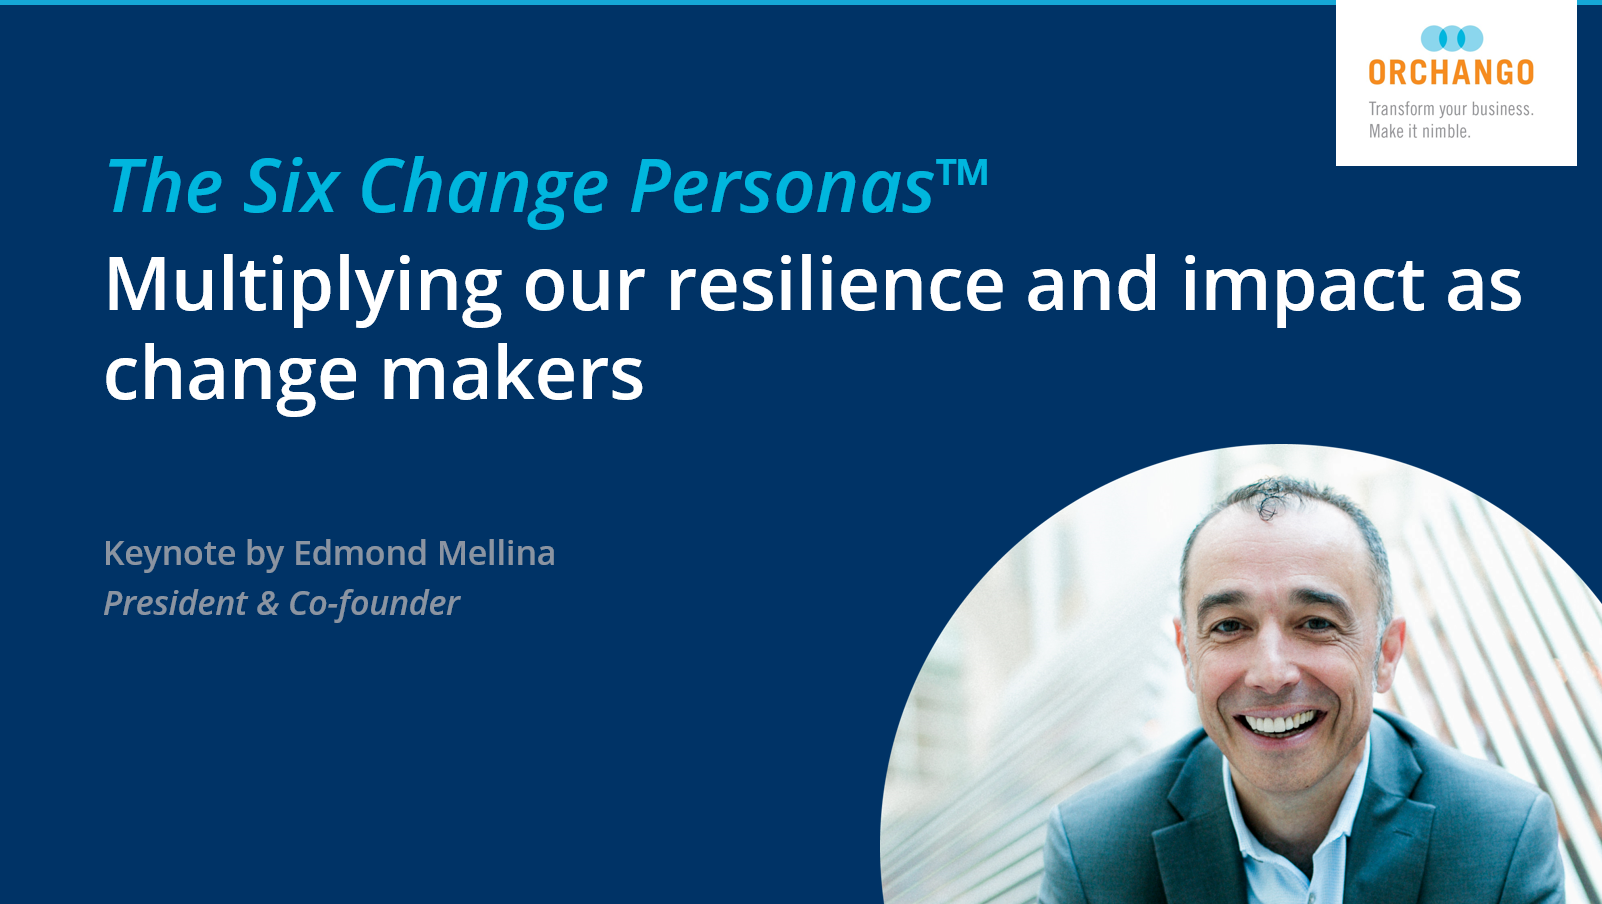 Keynote by Edmond Mellina - The Six Change Personas™ (for change makers)